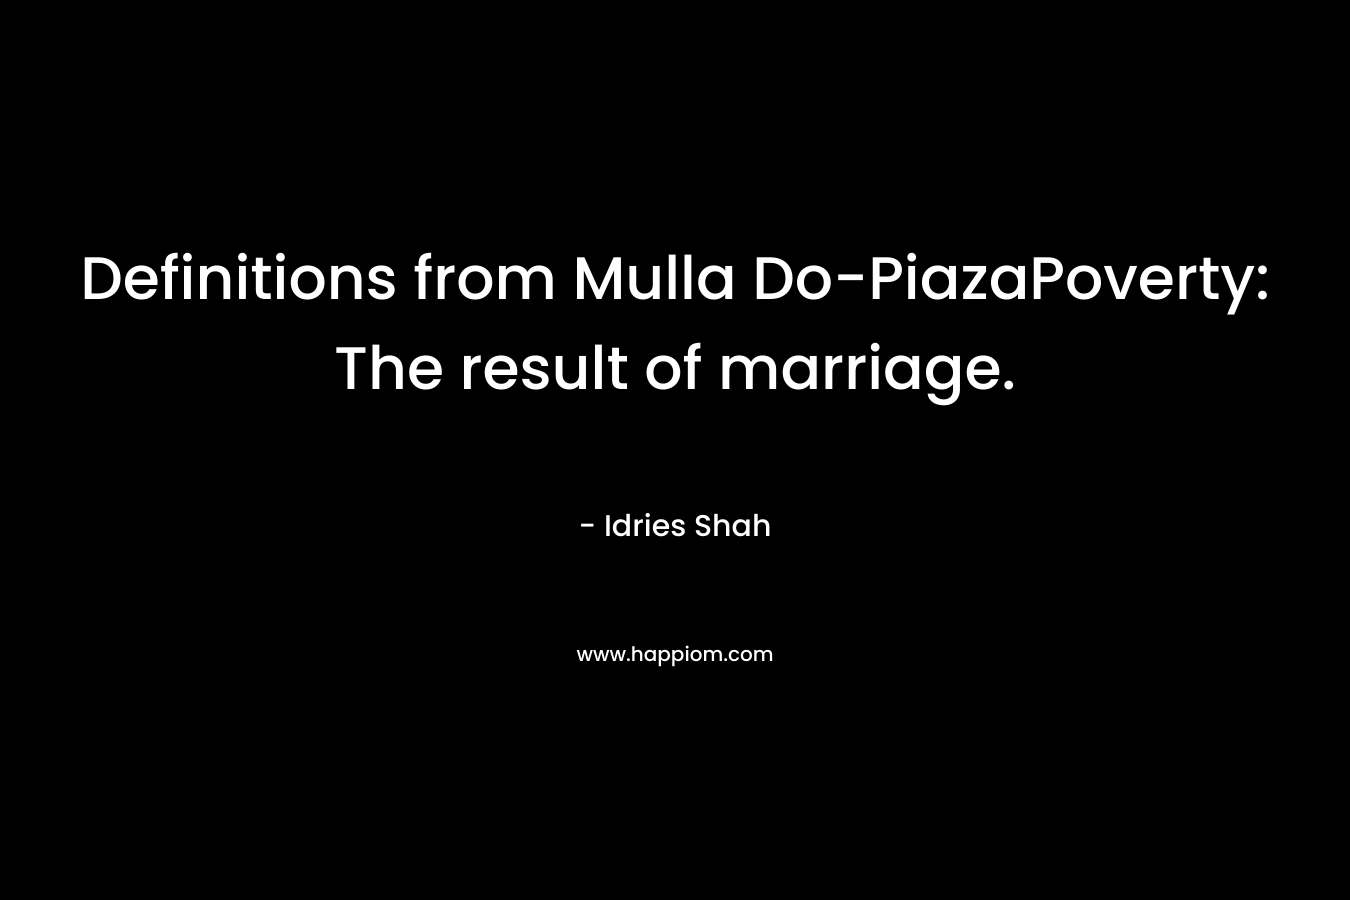 Definitions from Mulla Do-PiazaPoverty: The result of marriage. – Idries Shah